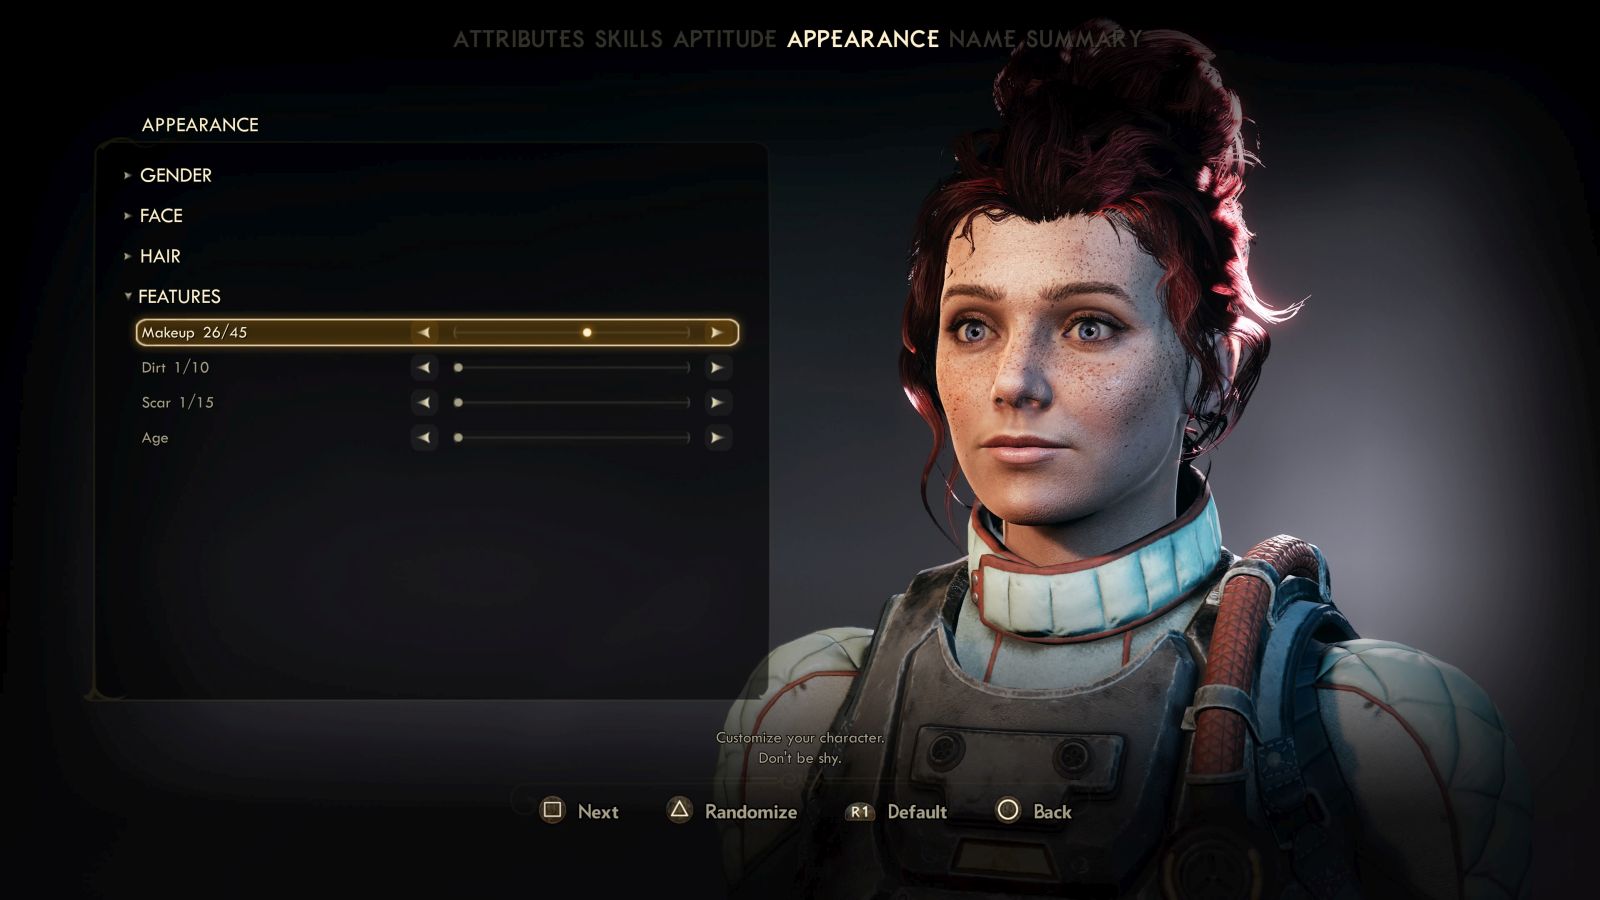 The Outer Worlds: Spacer's Choice Edition review – Boldly going